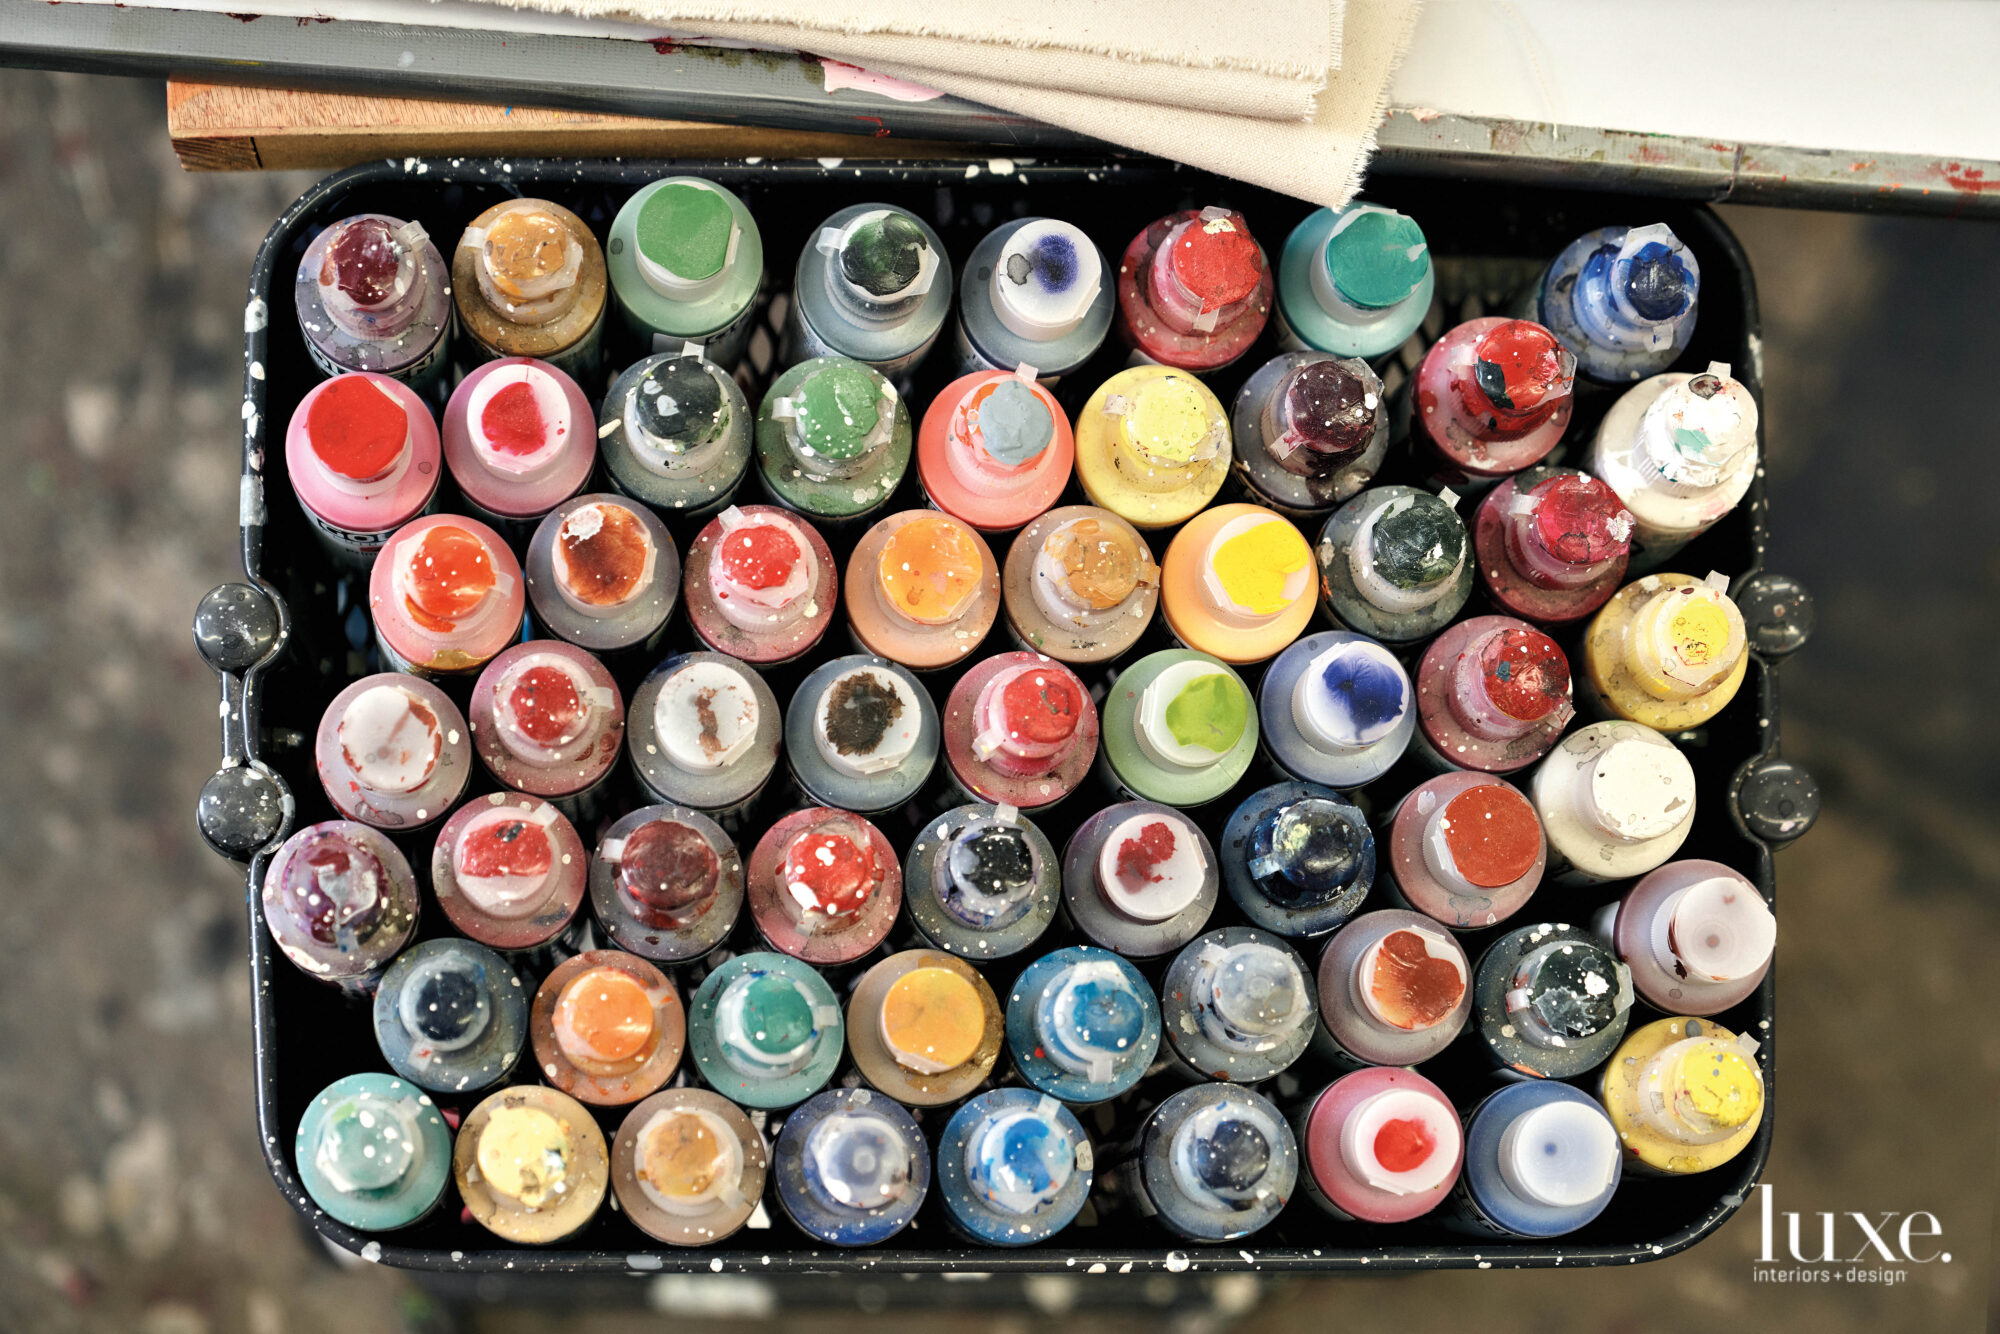 A row of paint bottles.